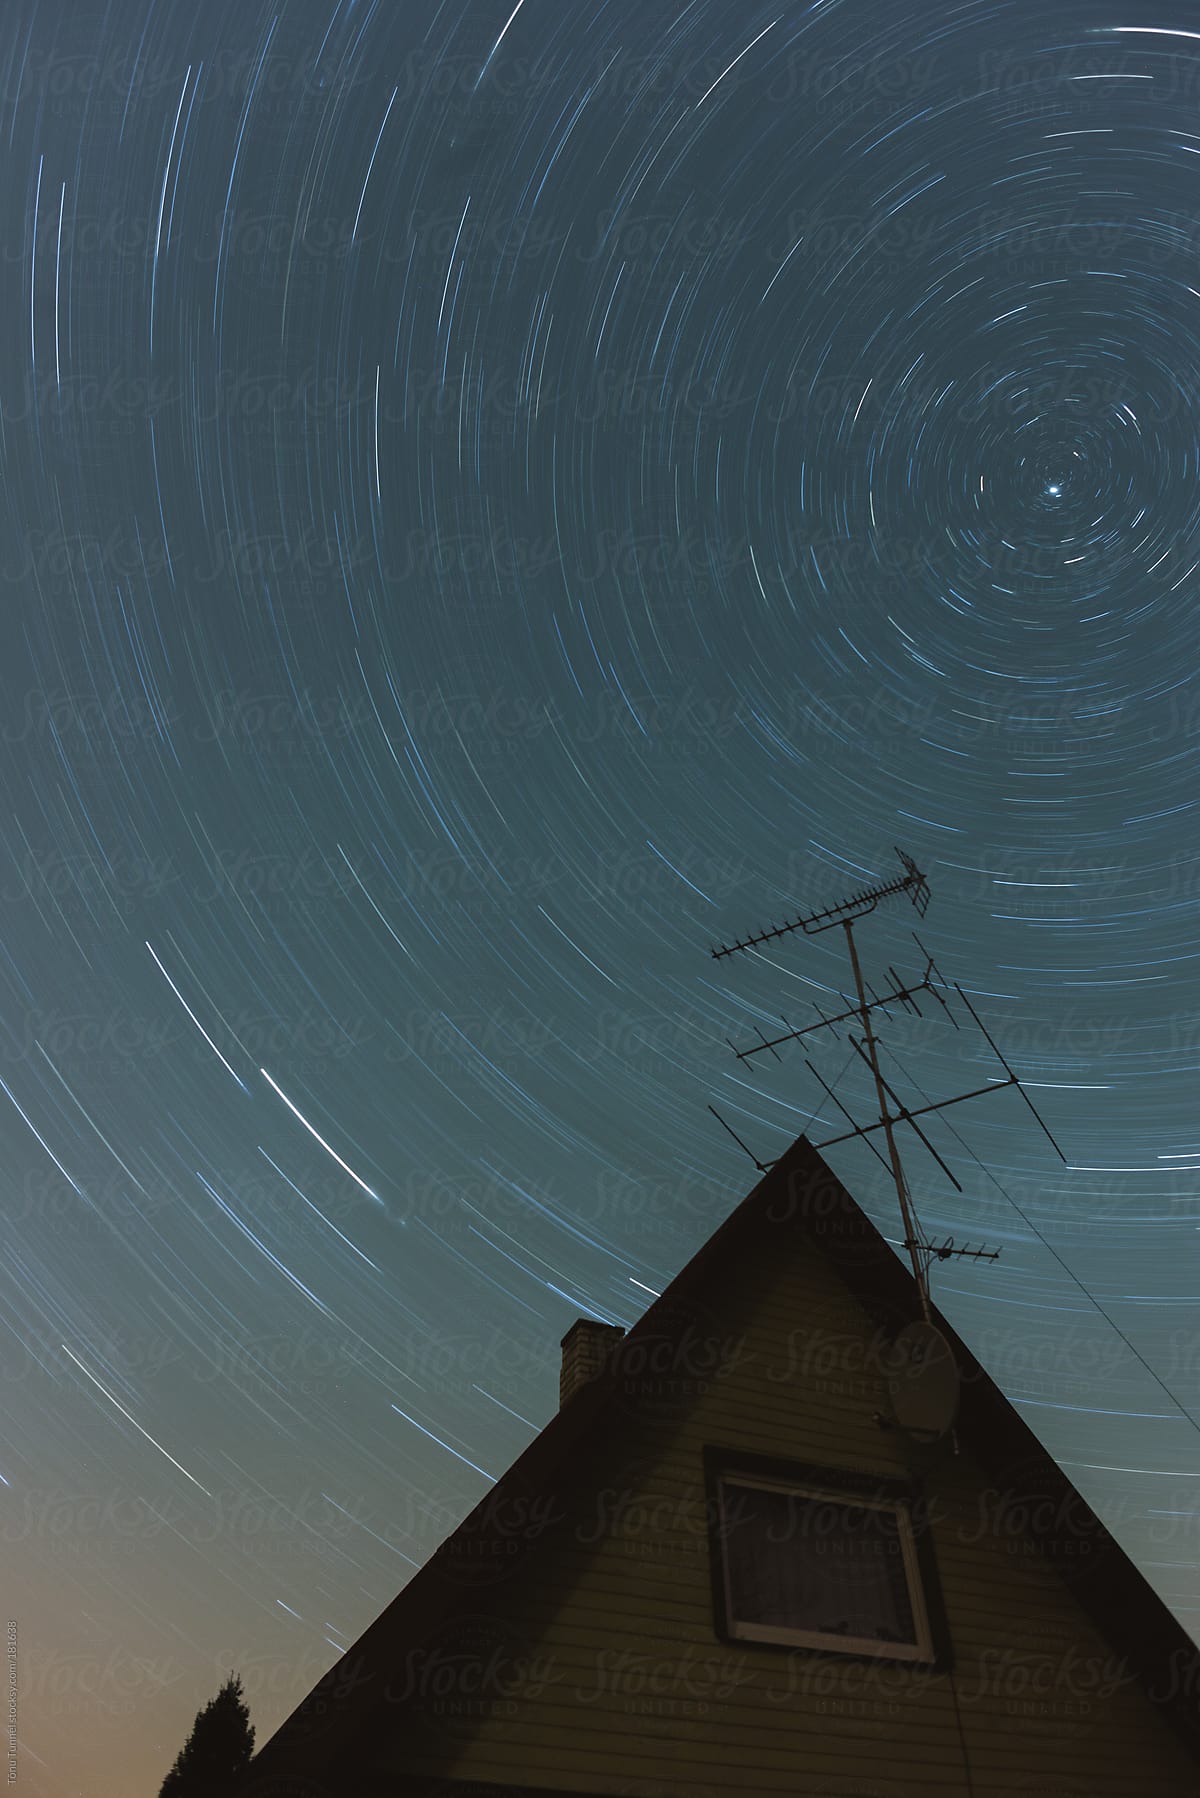 A house with an antenna under a starry sky swirling